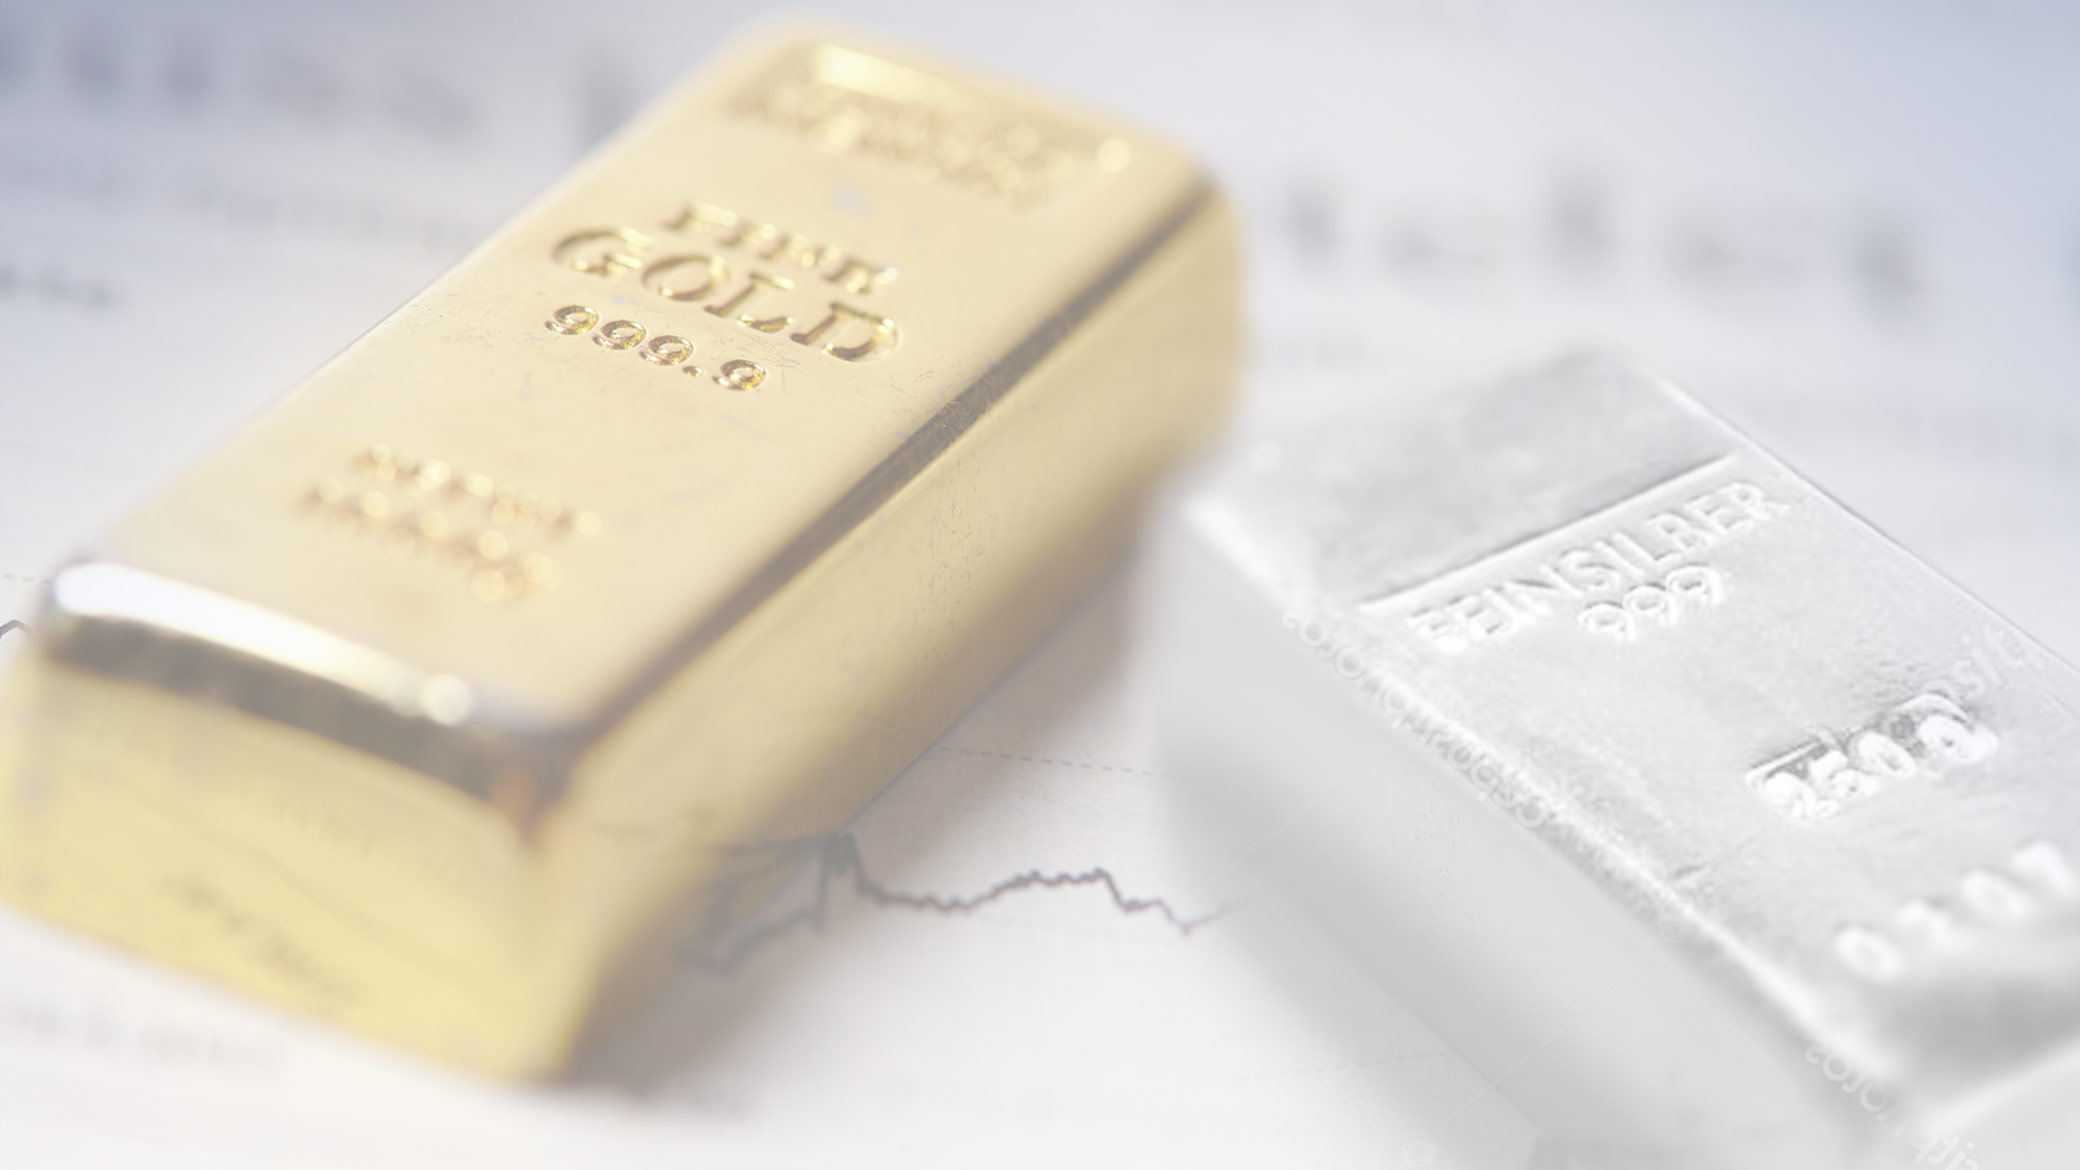 Our latest Gold & Cryptocurrency Analysis – MIDAS TOUCH ...